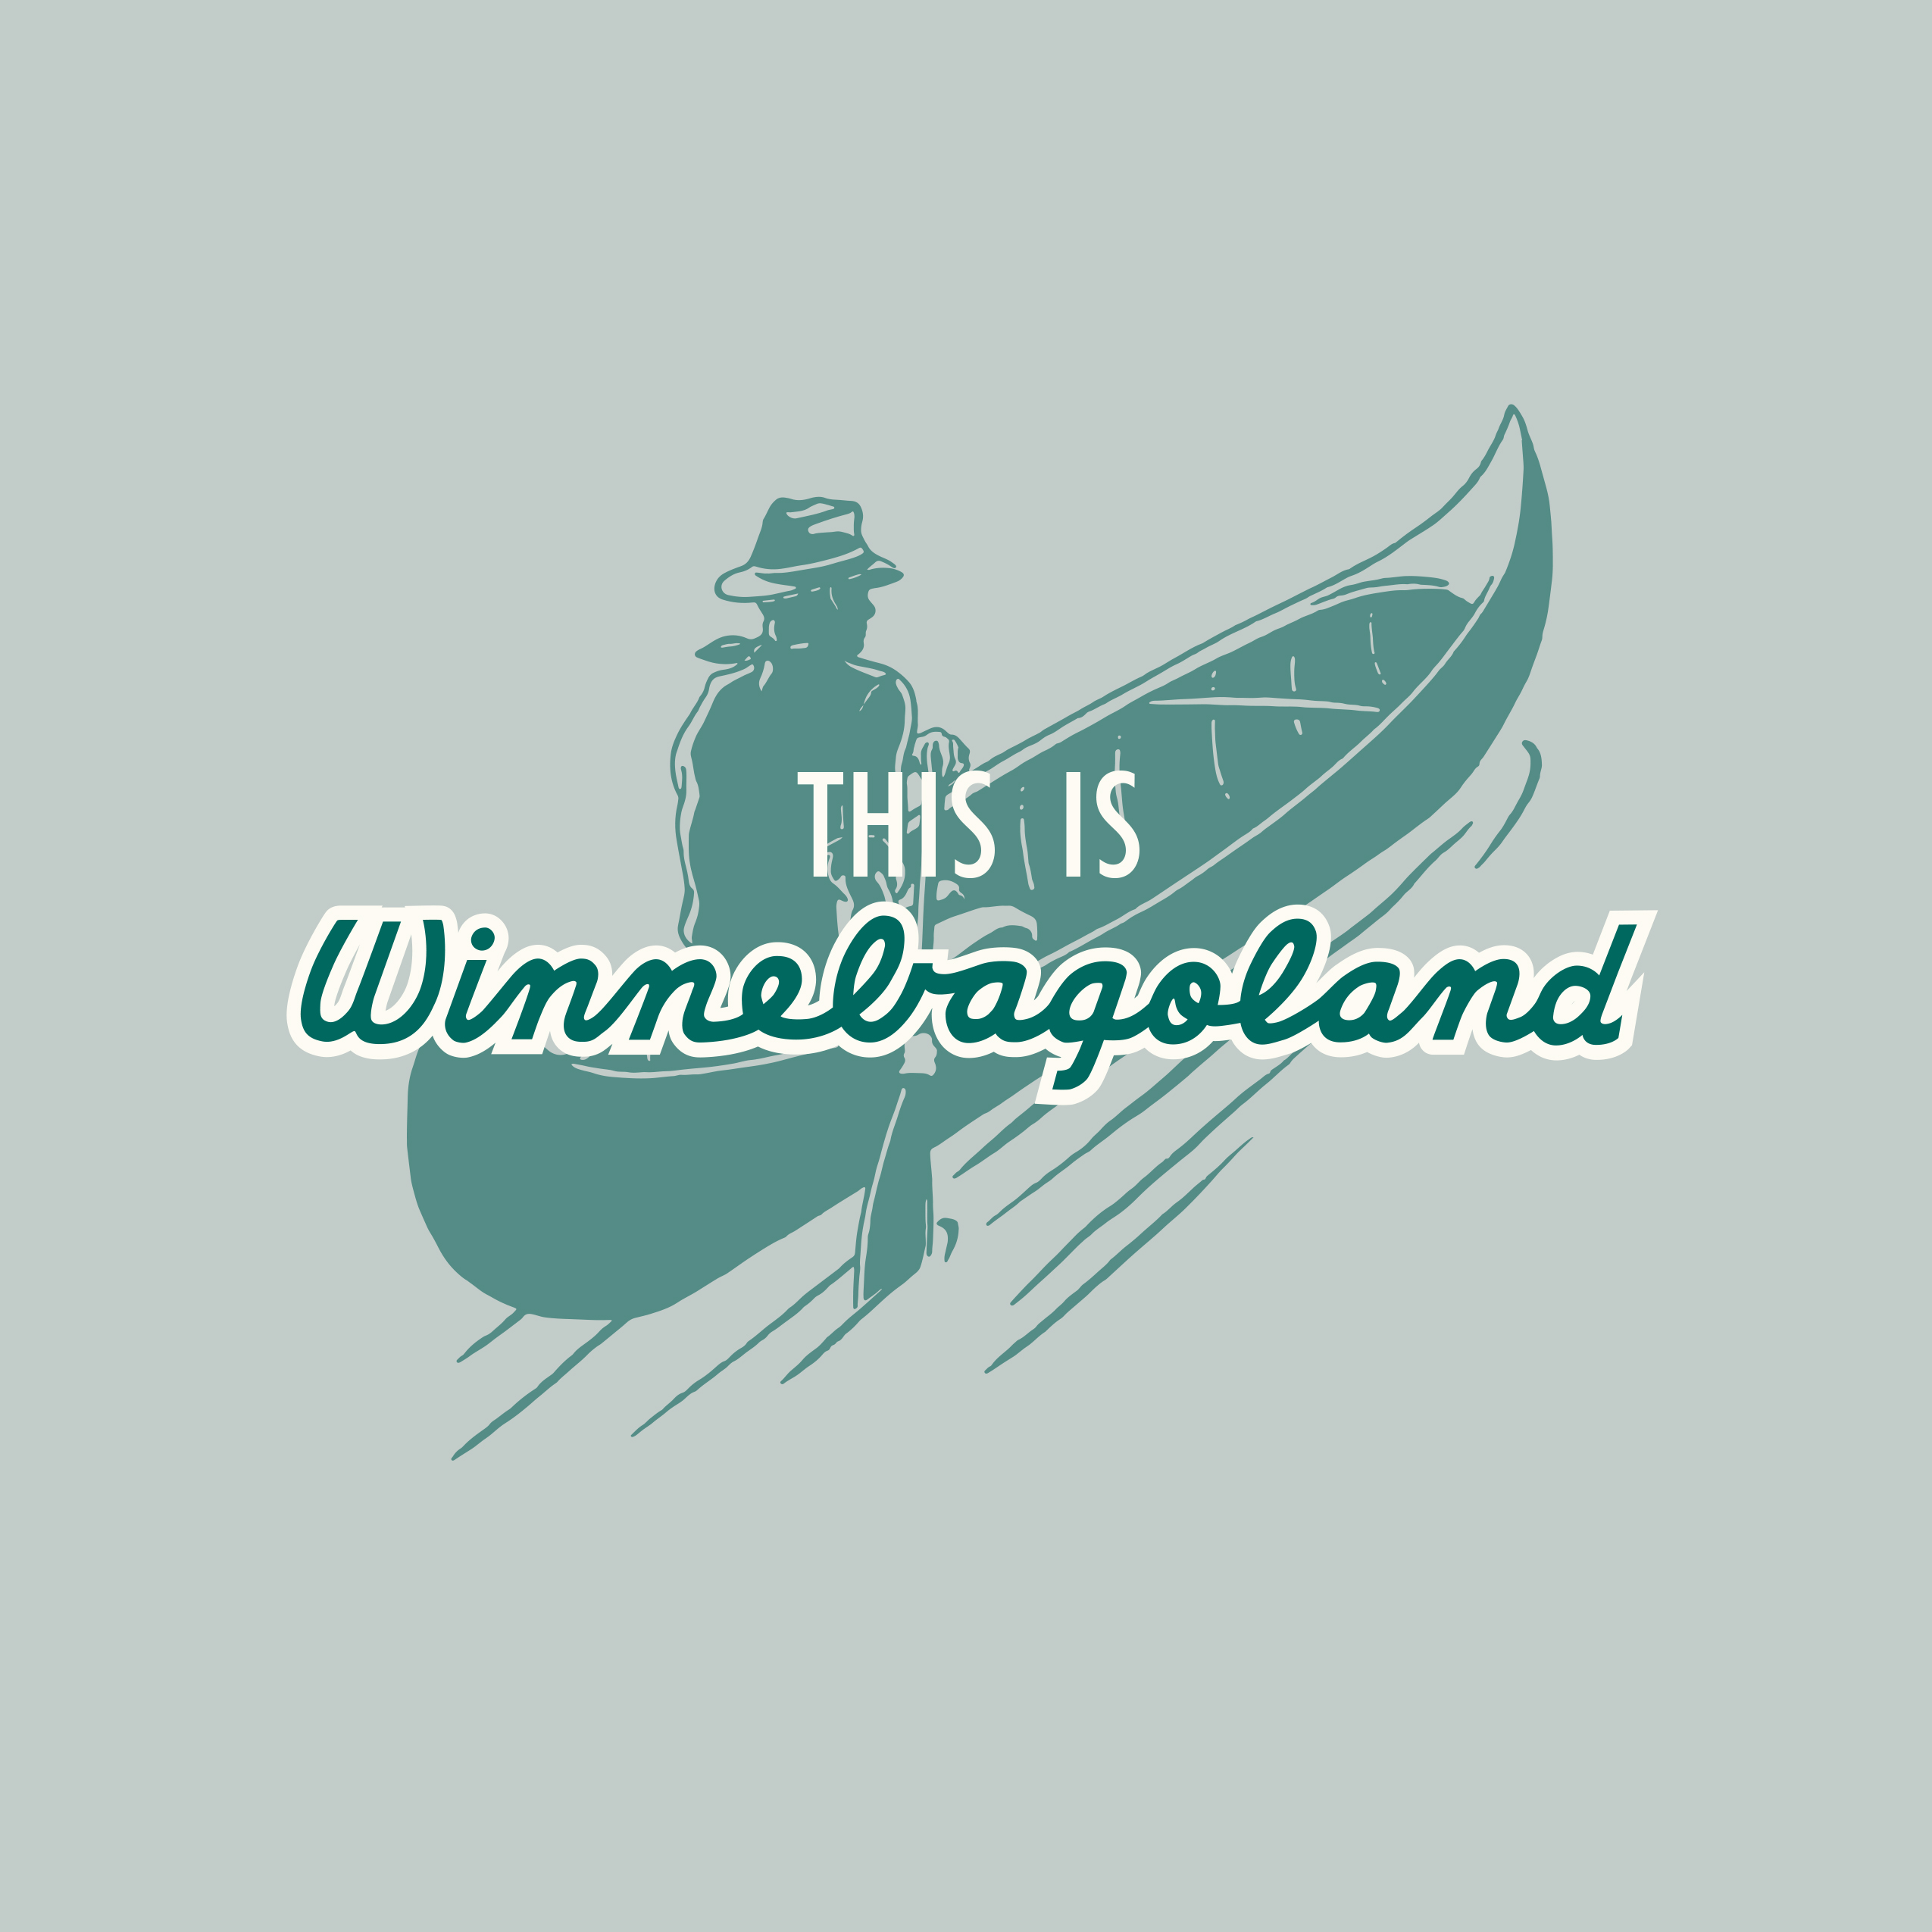 Logo used for This Is Winnebagoland exhibit